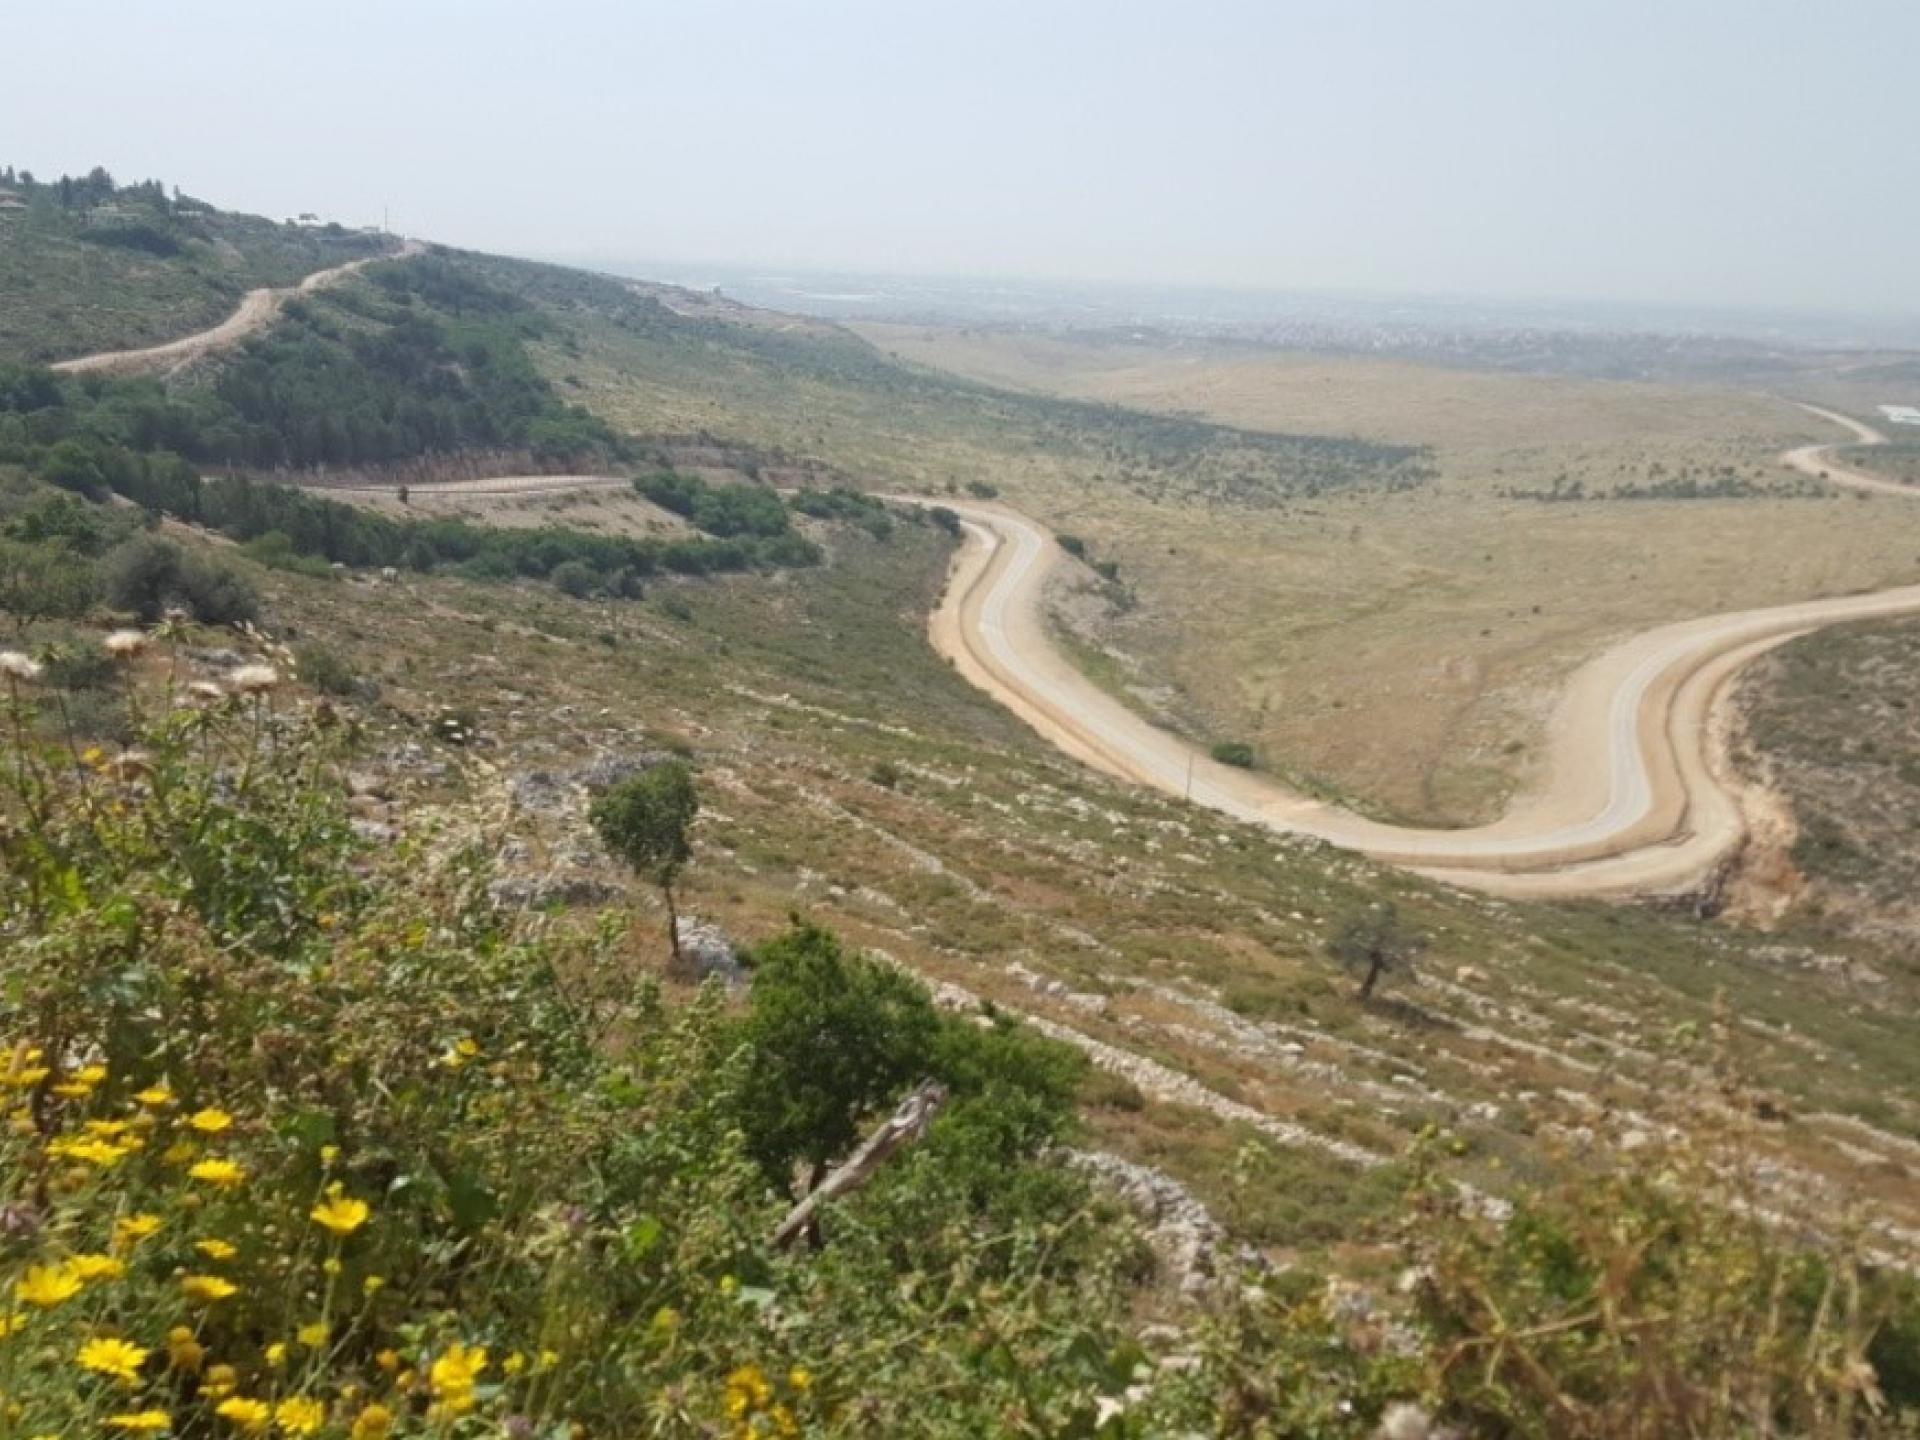 The”security” fence track – prior to the erection of the fence, villagers of Sur would descend the hill on donkey-back and reach their farmland directly. Now this is impossible.